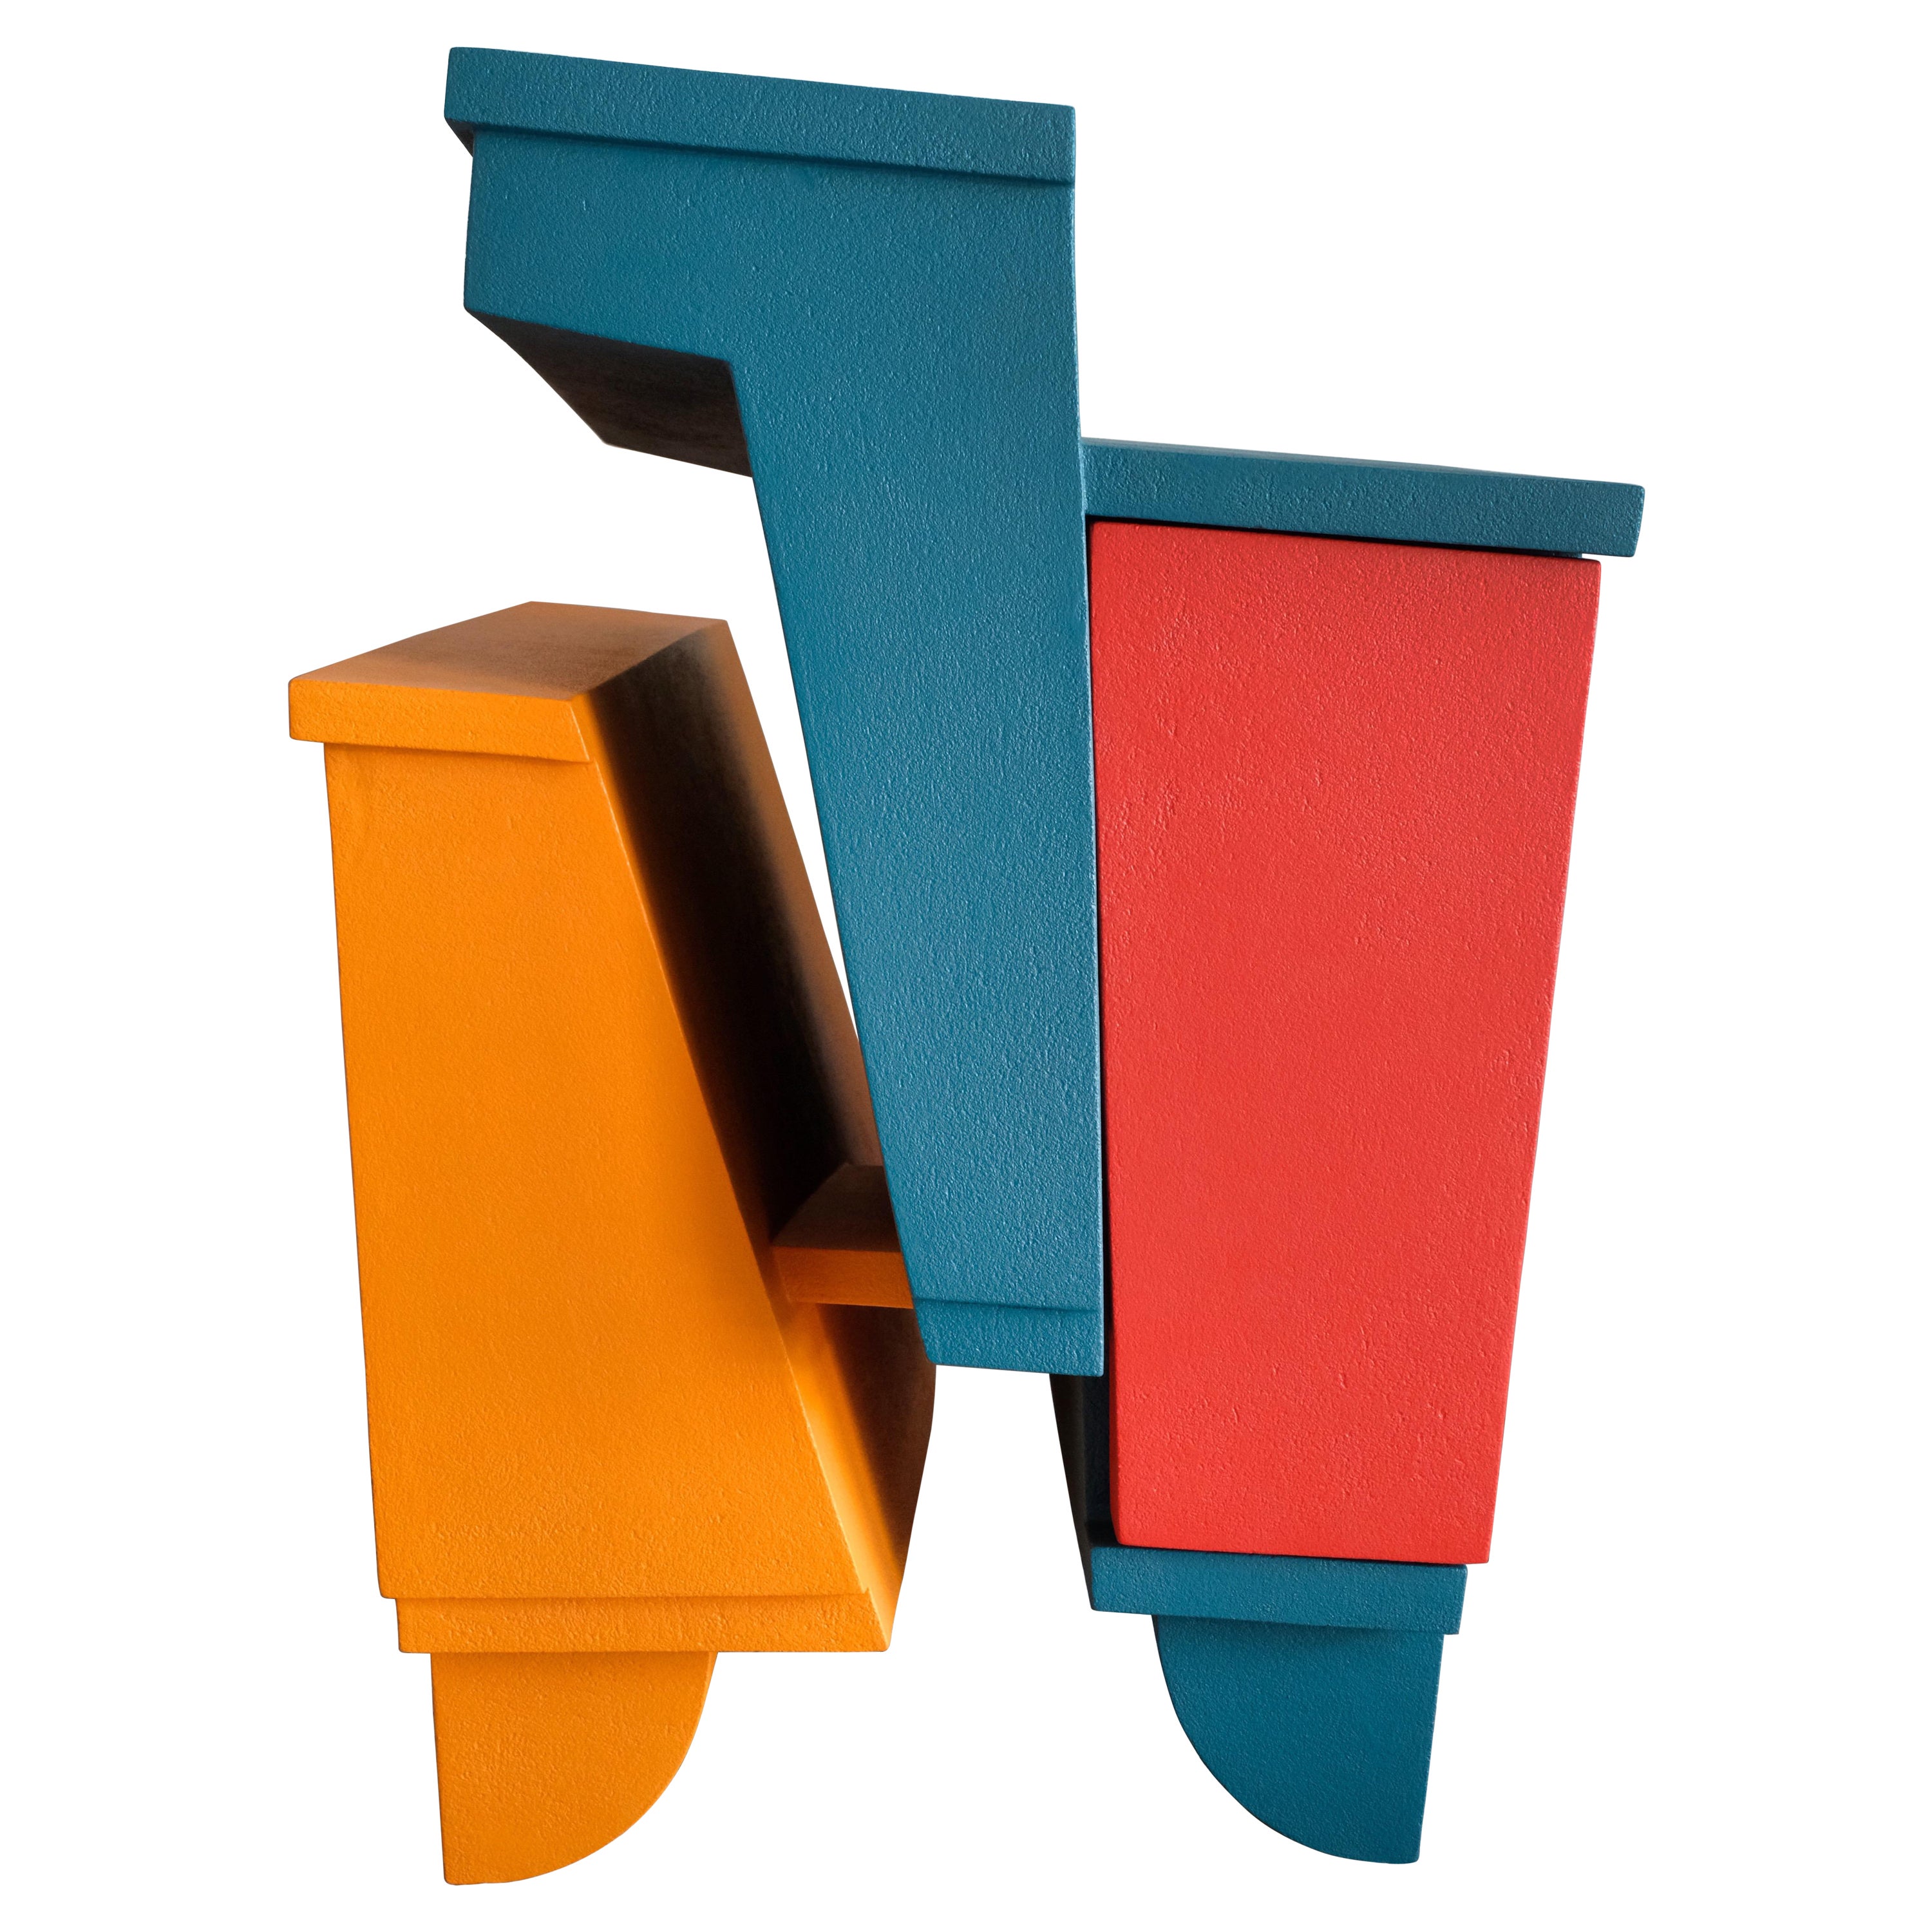 21st Century Cabinet-Sculpture Contemporary Red-Blue-Orange Colors in Wood-Resin